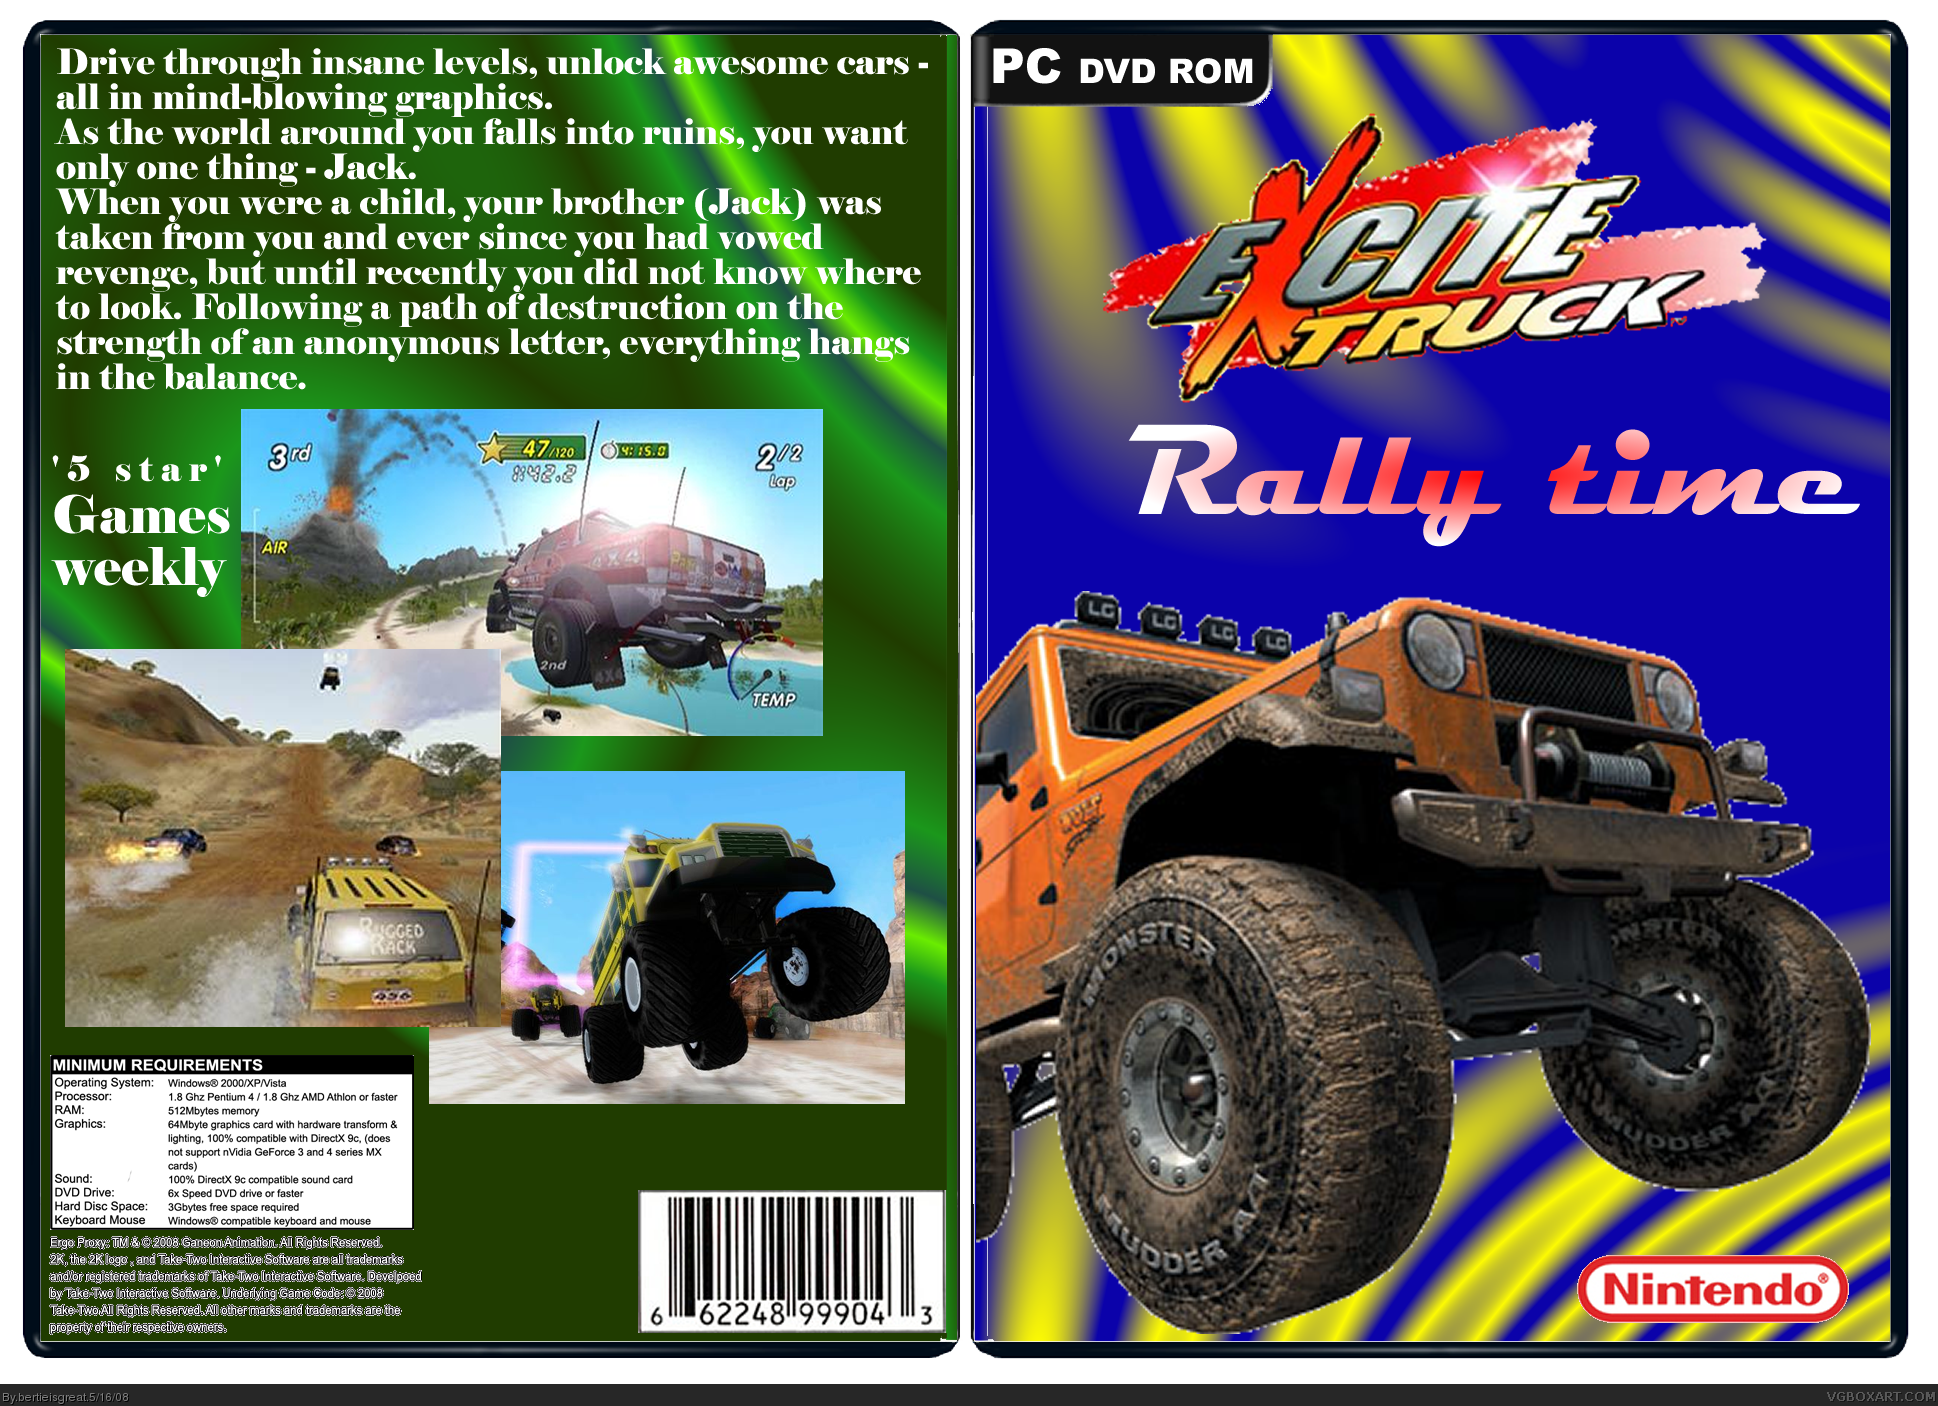 Excite Truck 2: Rally time box cover